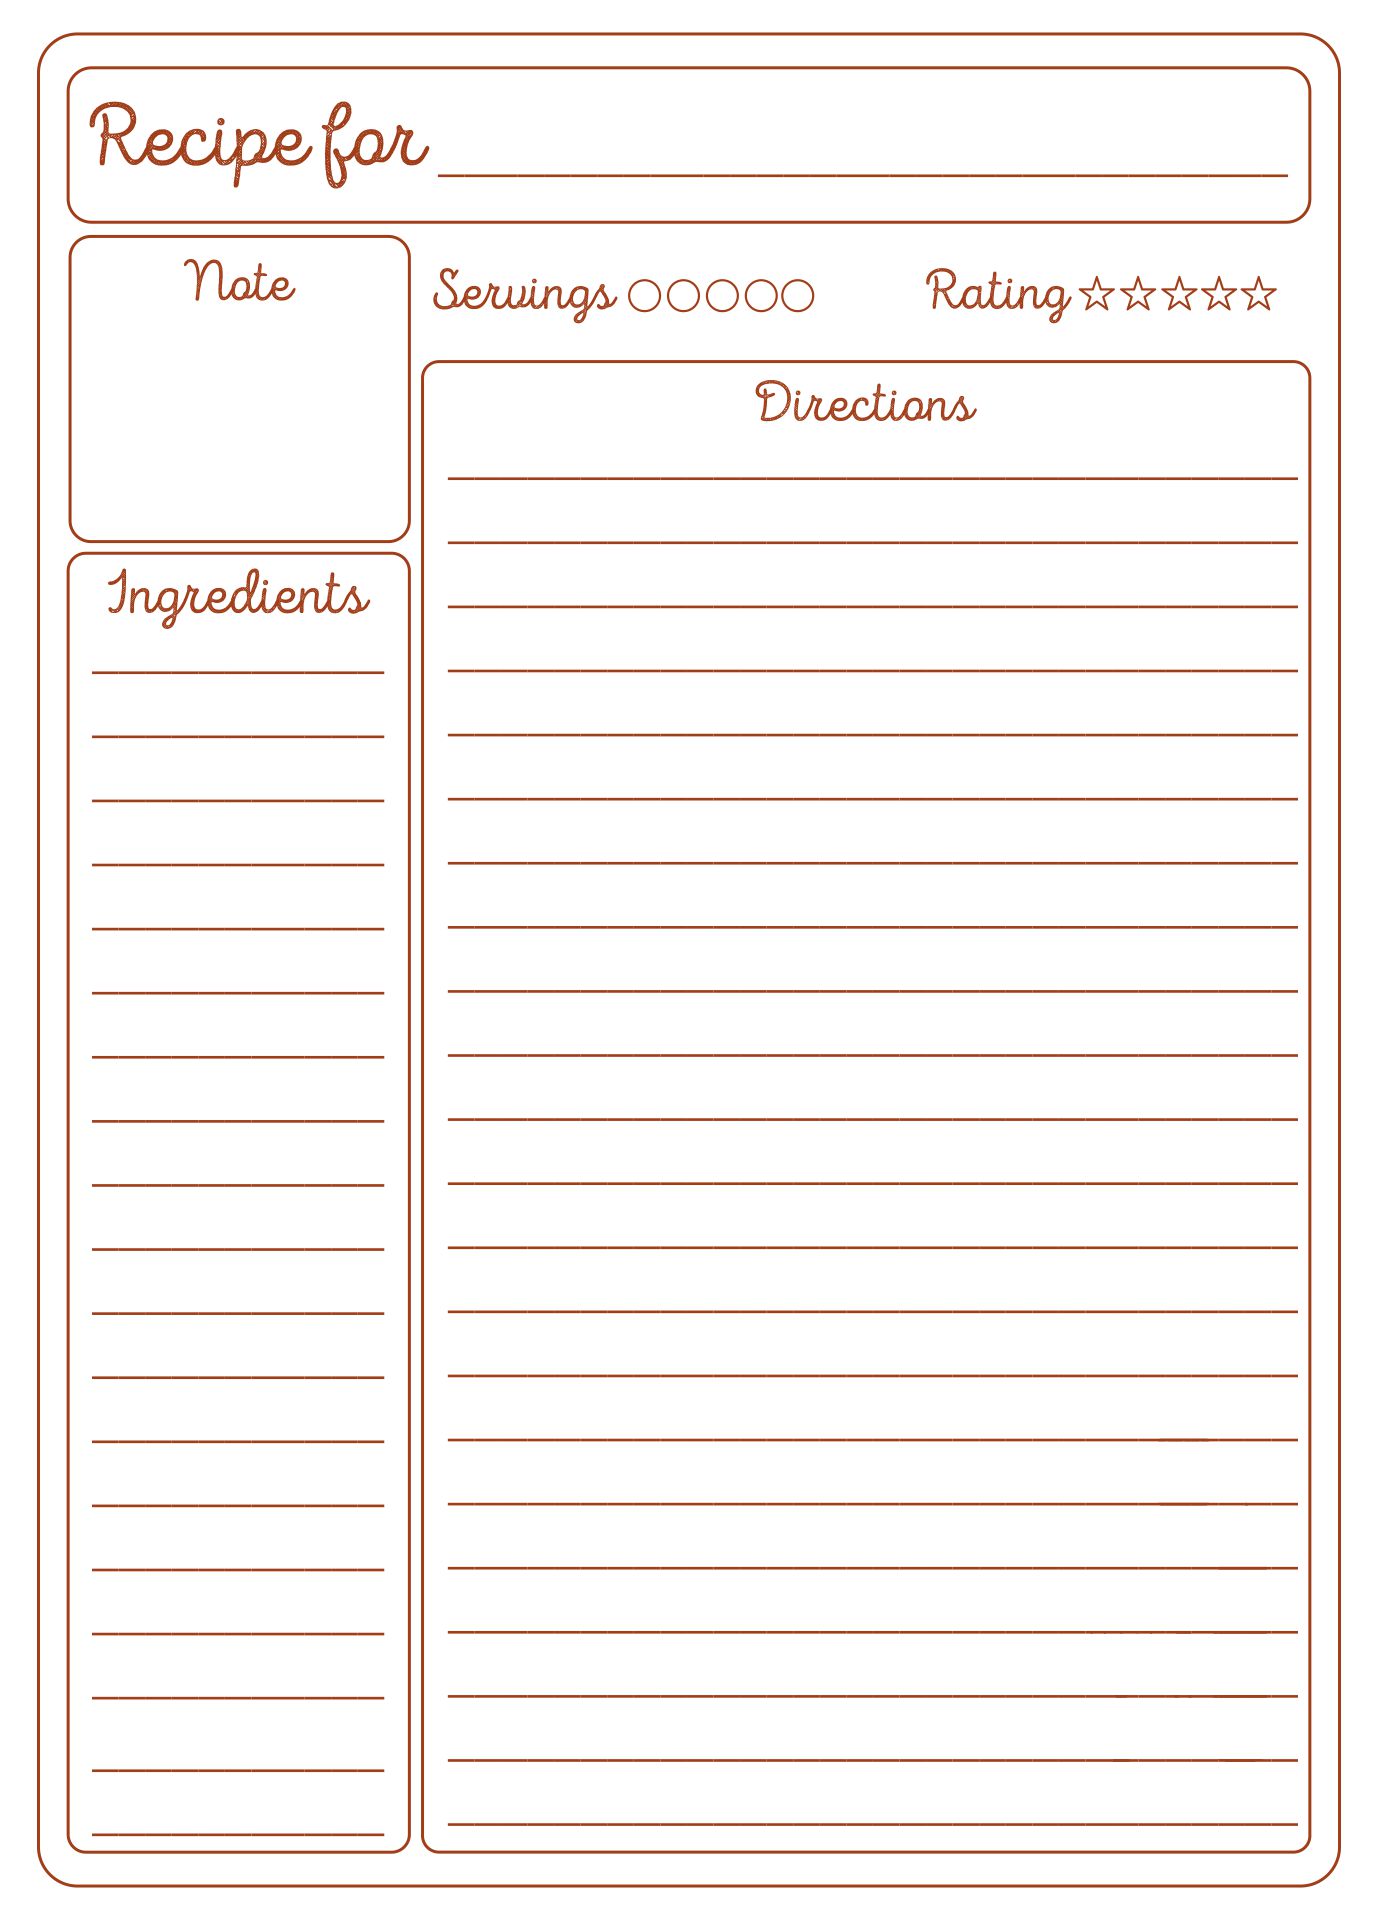 downloadable-free-recipe-card-template-for-word-pandaamela